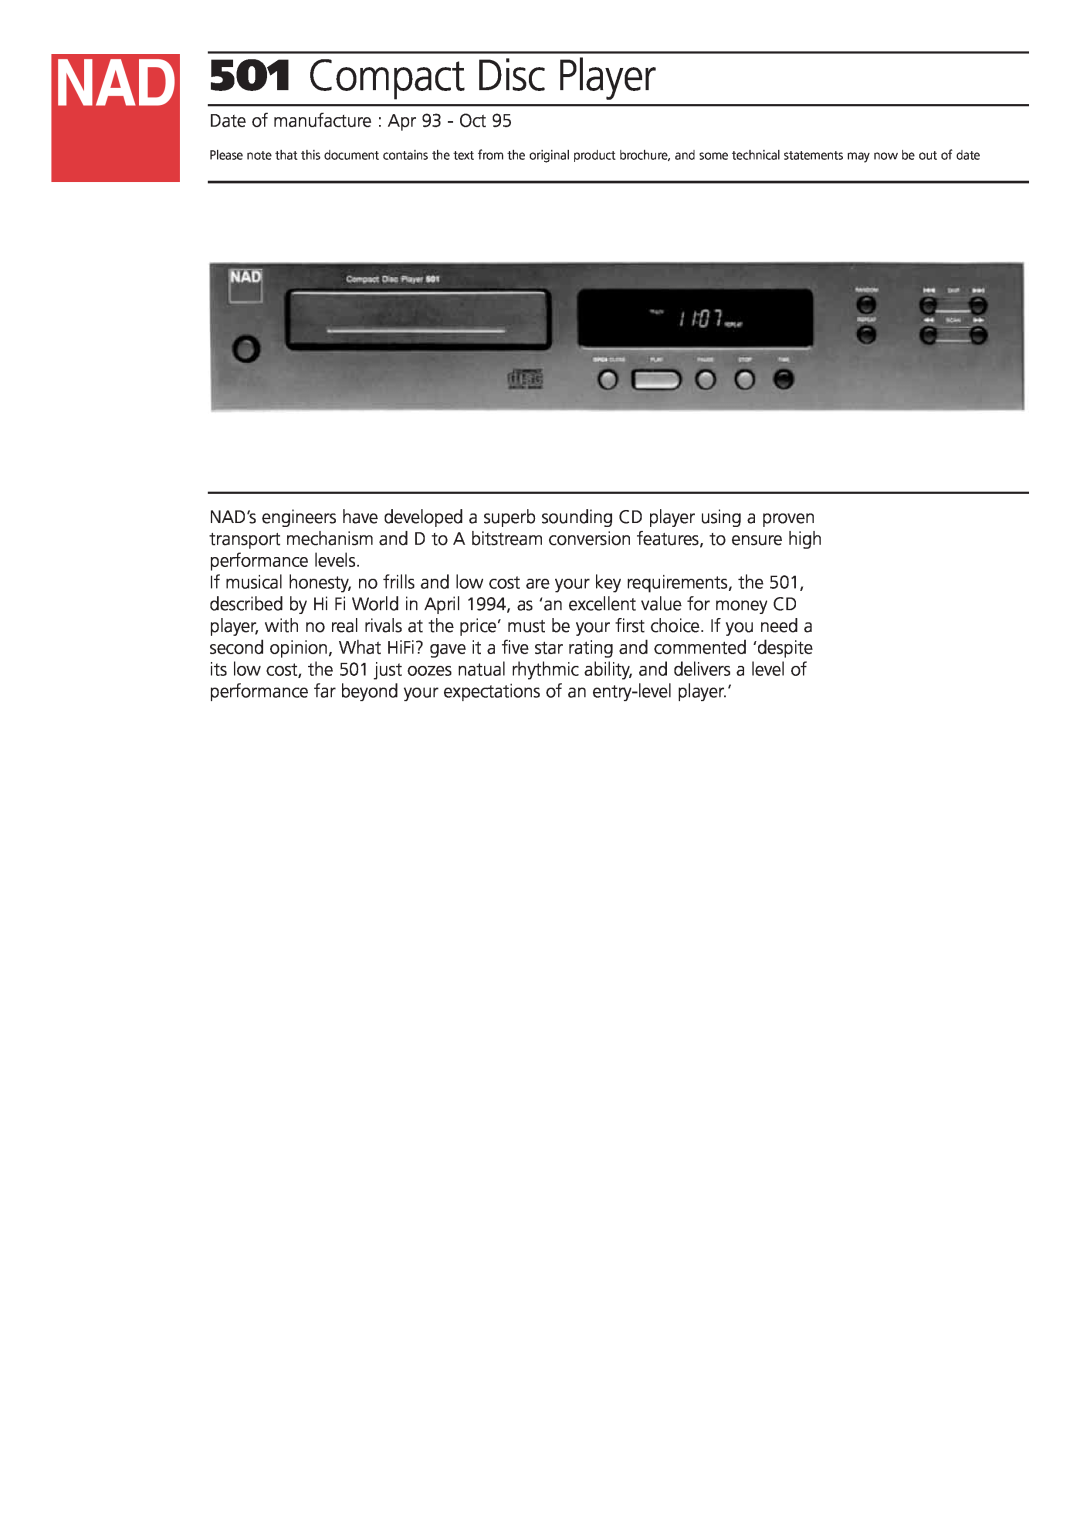 NAD brochure 501Compact Disc Player 